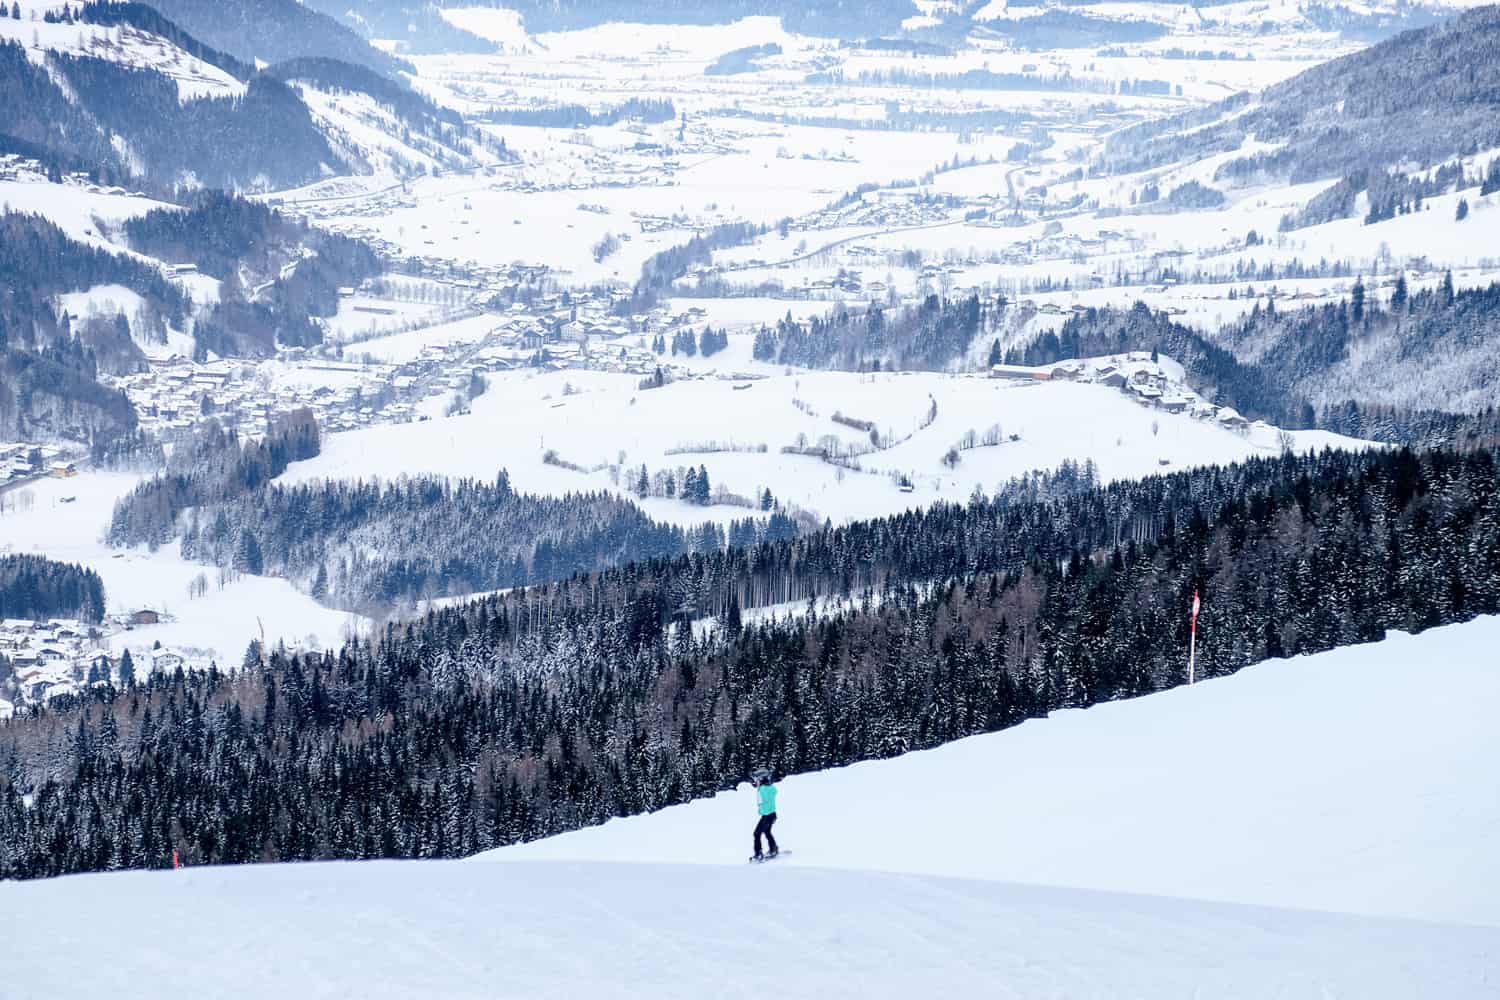 A lone skier on the slopes of a Salzburg ski resort with the valley bed below in the background